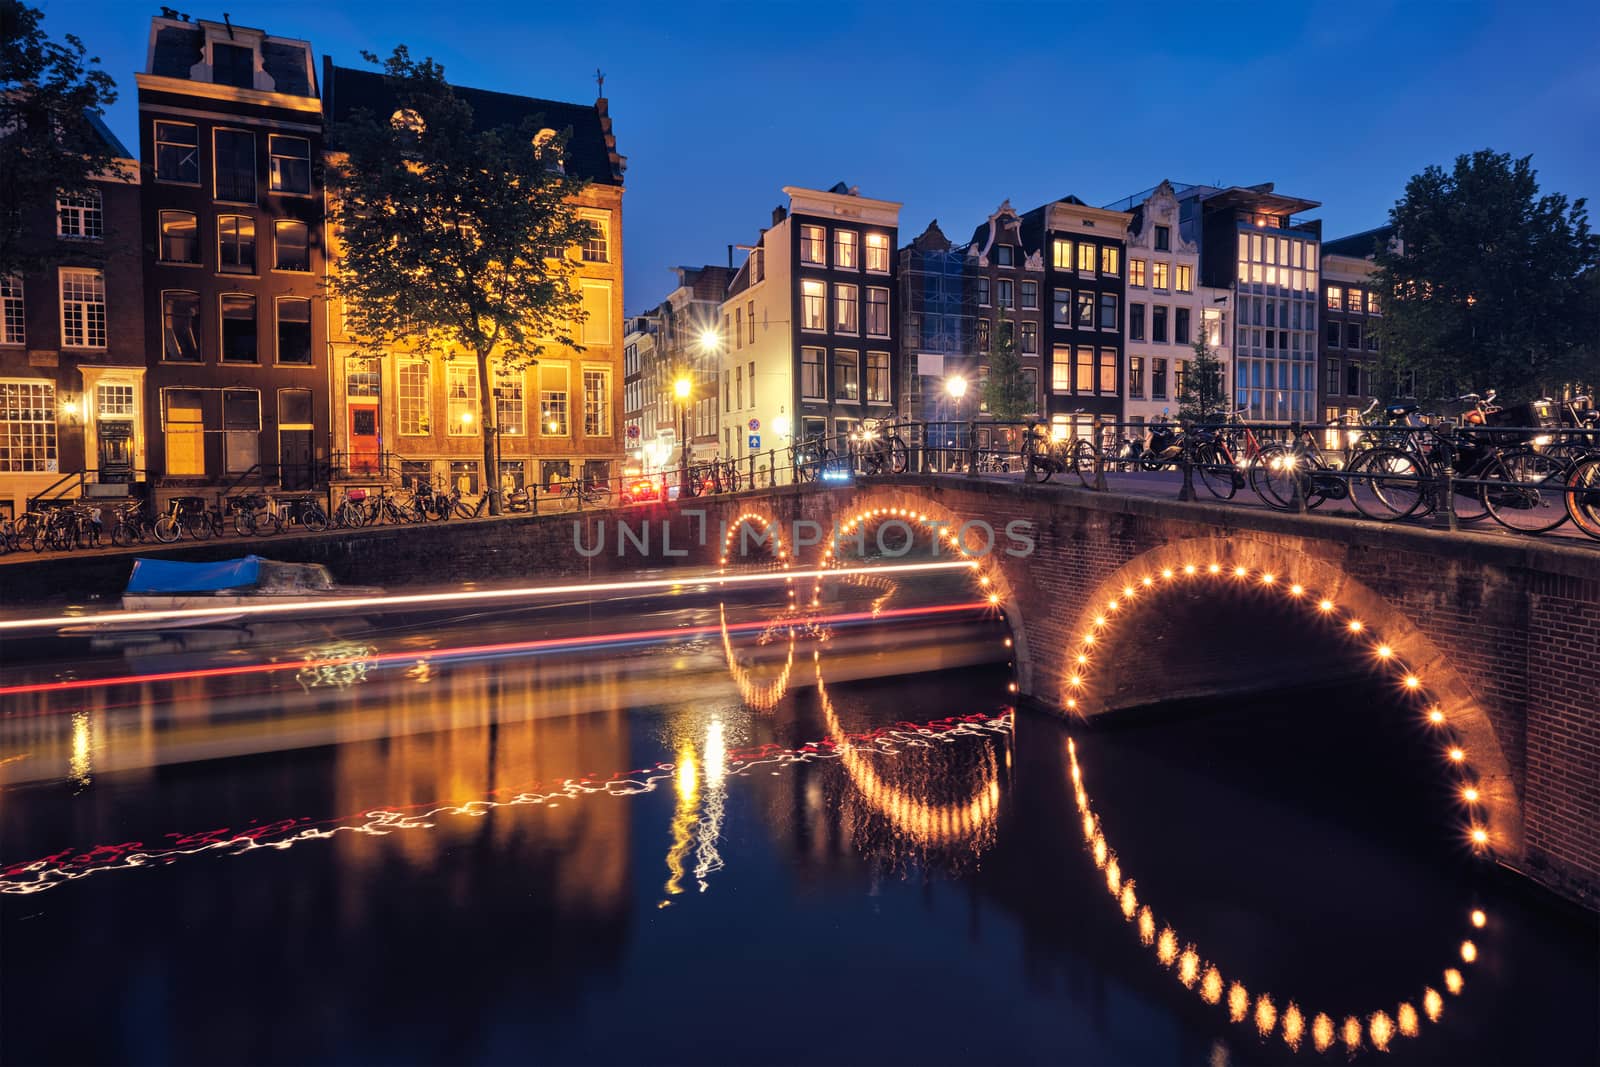 Night view of Amterdam cityscape with canal, bridge and medieval houses in the evening twilight illuminated with boat light trails. Amsterdam, Netherlands